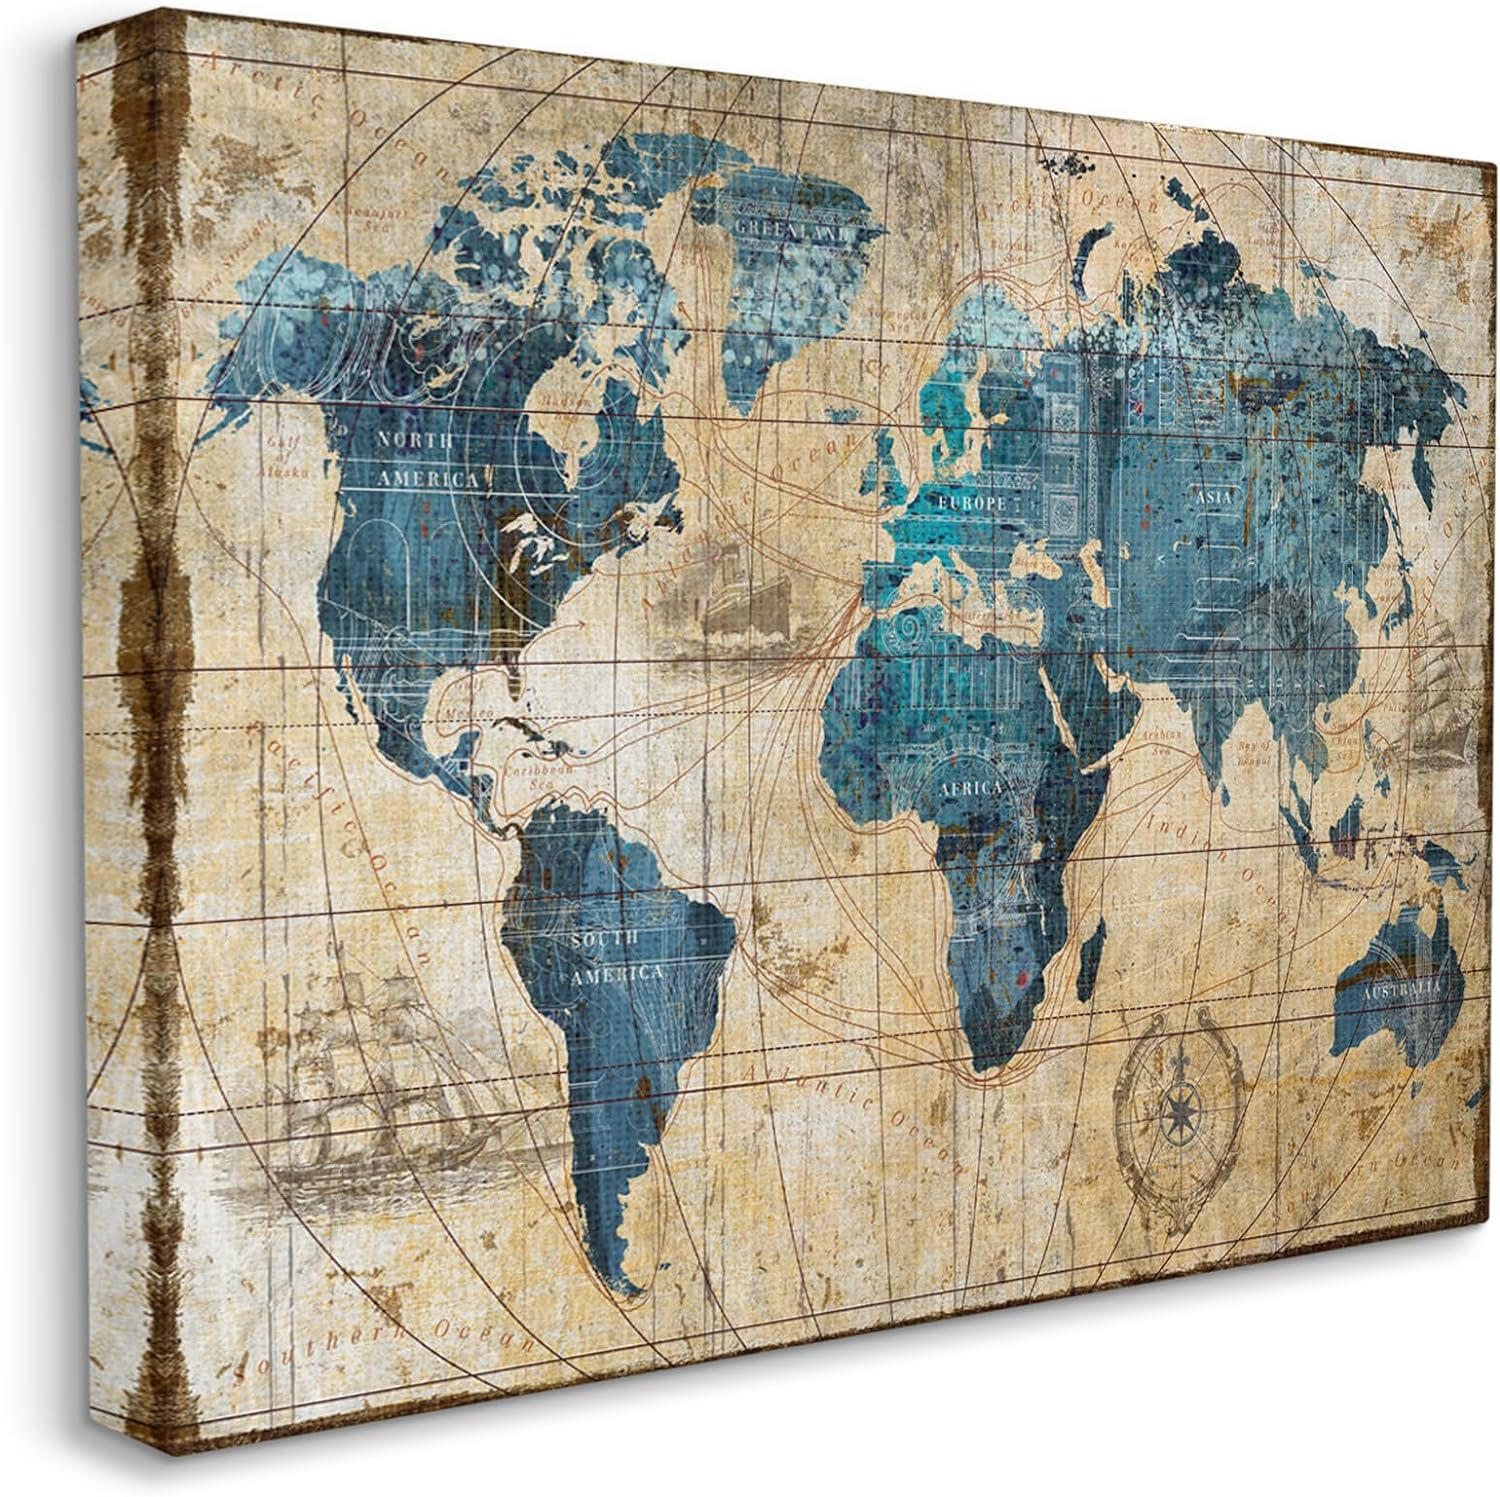 Vintage Abstract World Map Design Decorative Wall Hangings, Multi-Color, 24X30, 